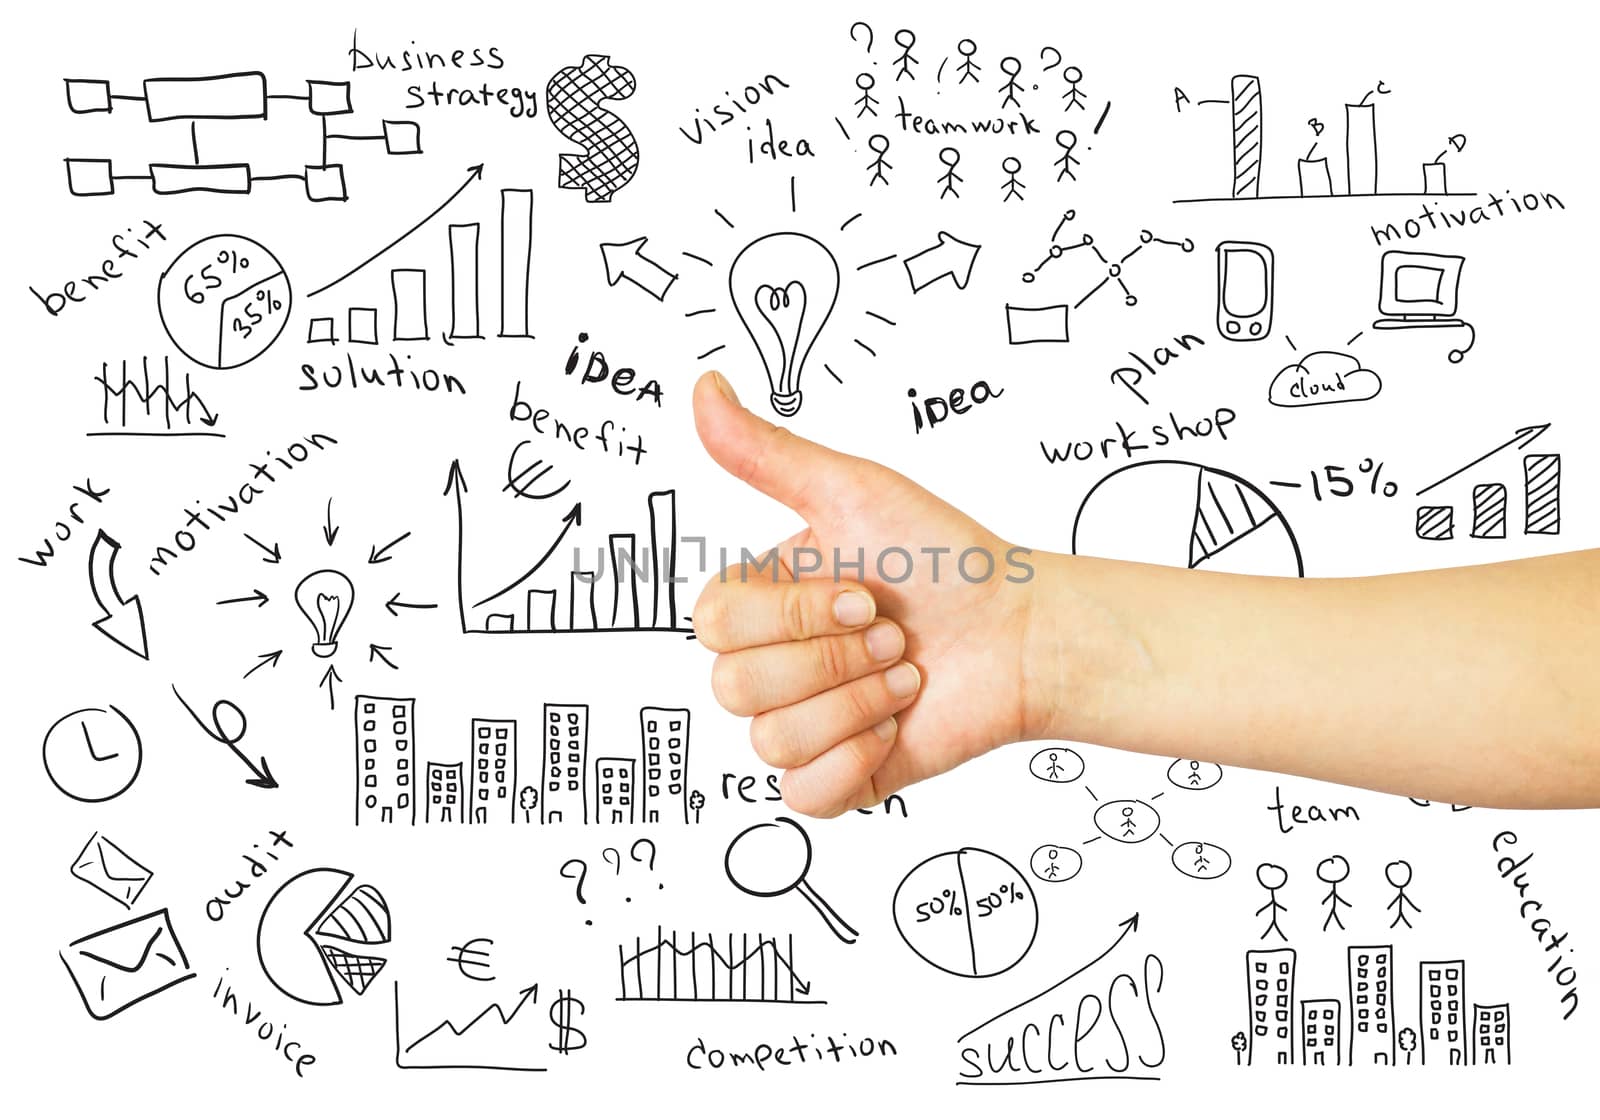 Female hand with raised thumb and business sketches. The business concept